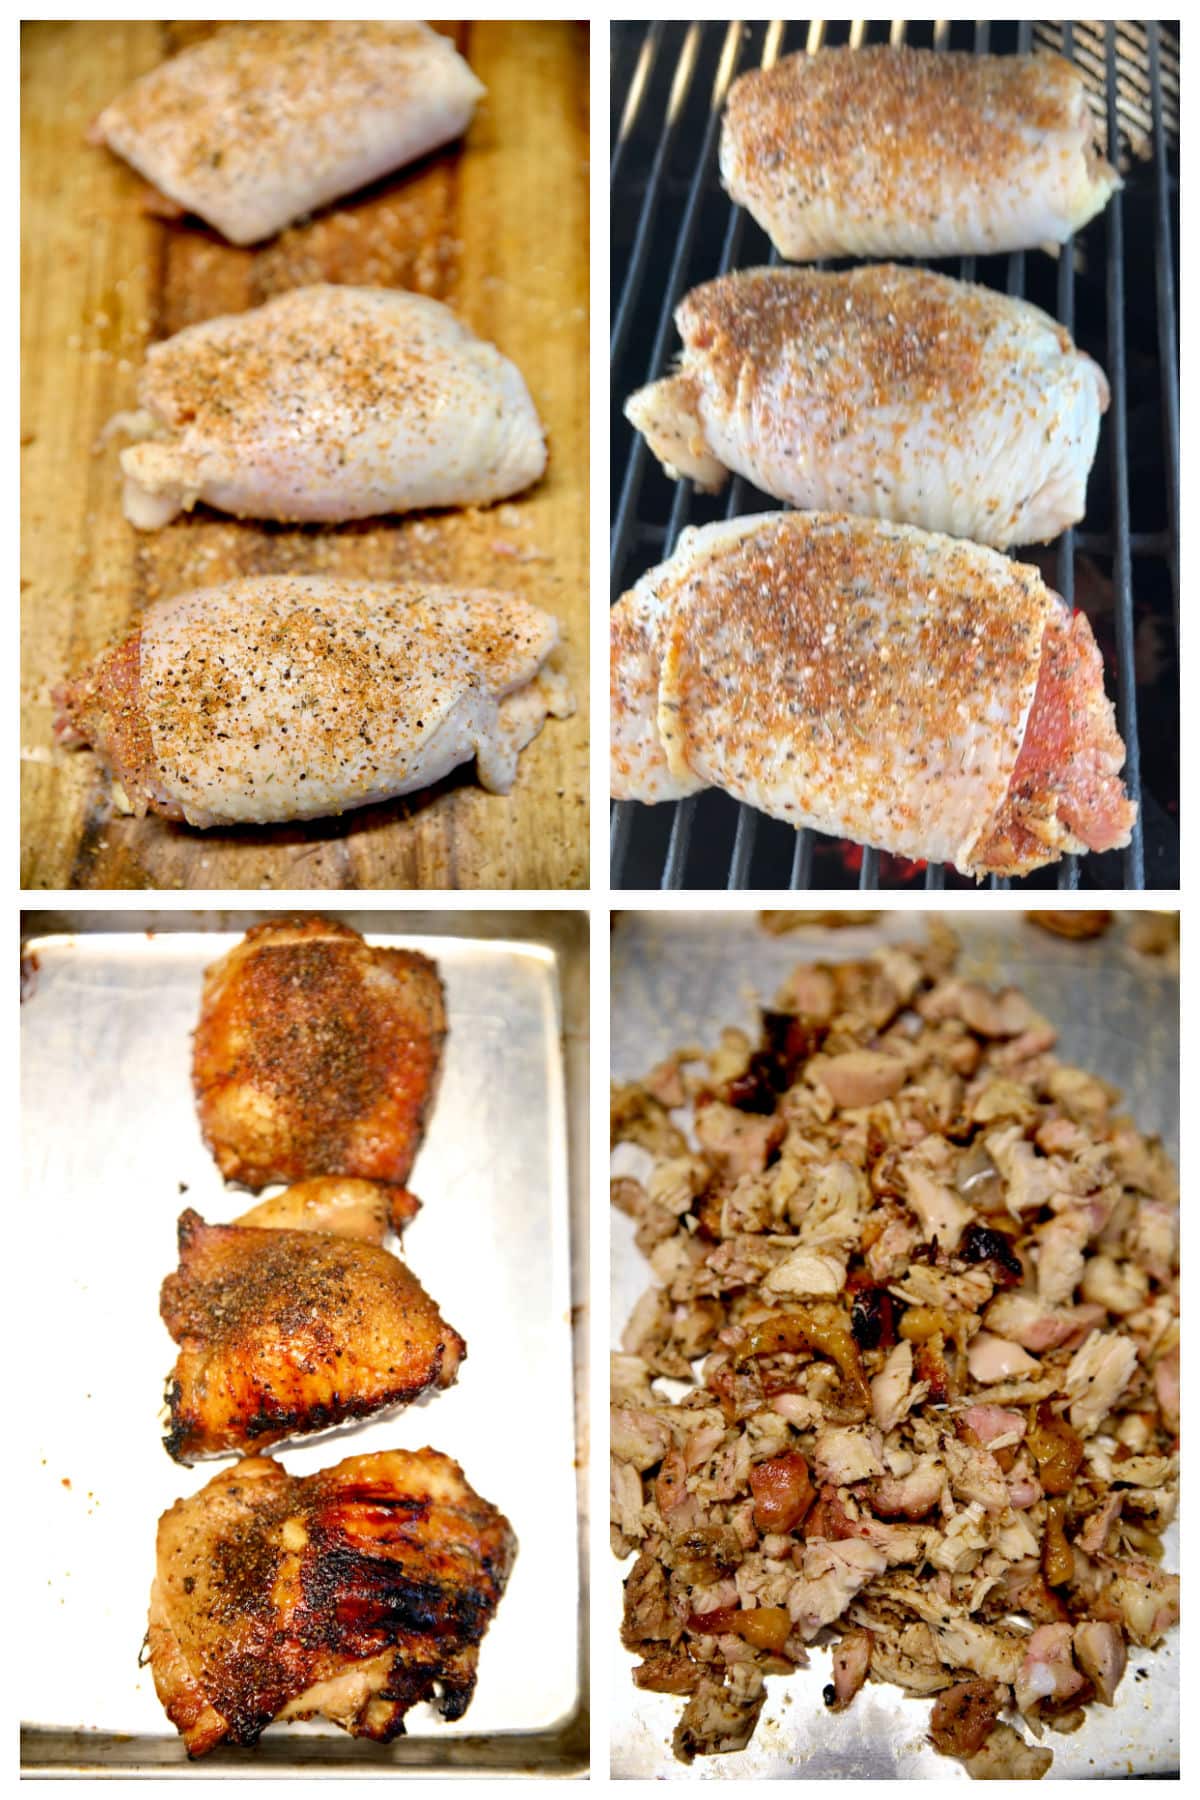 Collage grilling chicken thighs and chopping for chicken and dumplings.